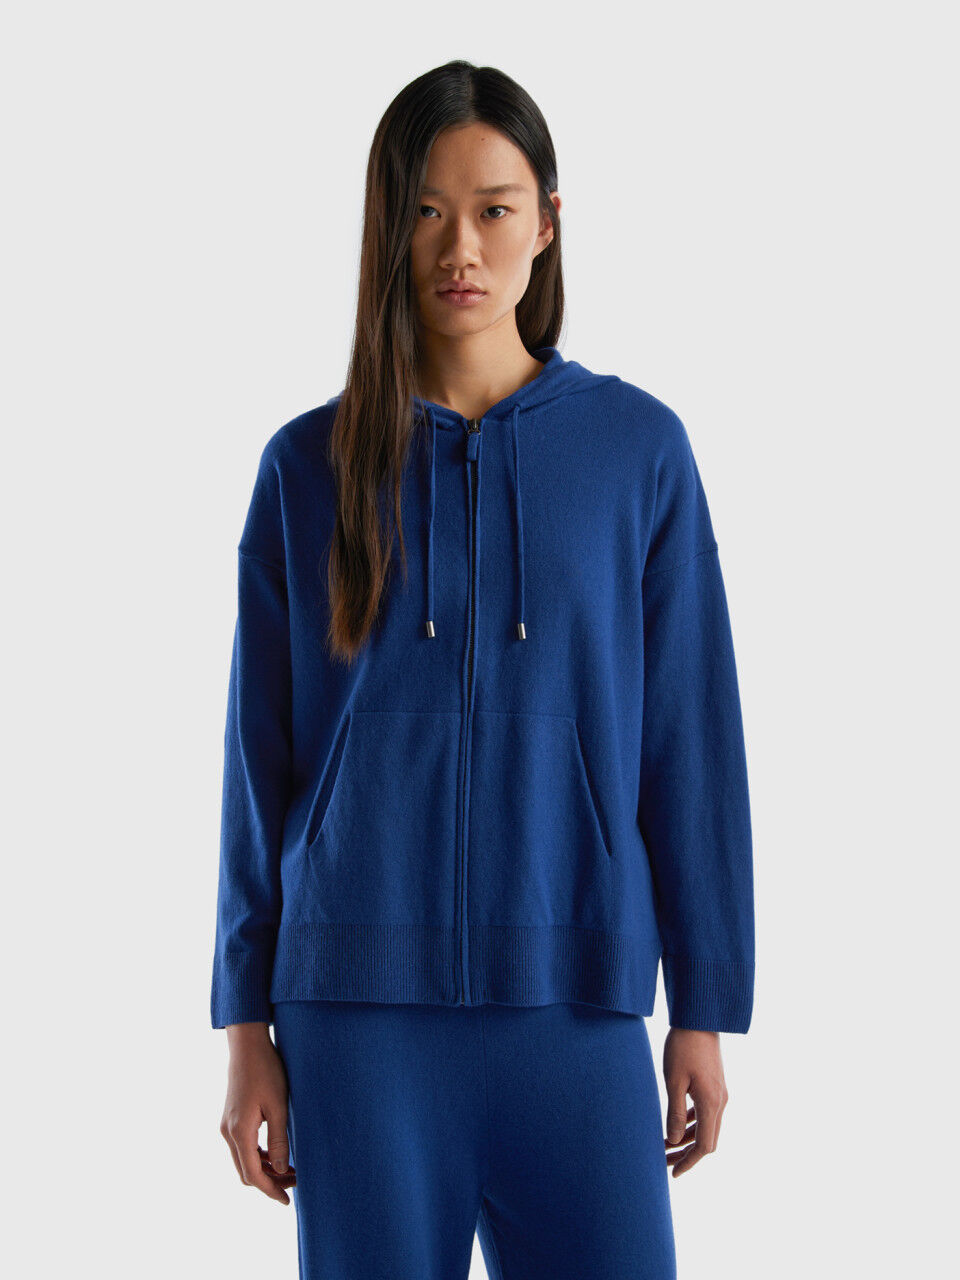 Midnight blue sweater in cashmere blend with hood